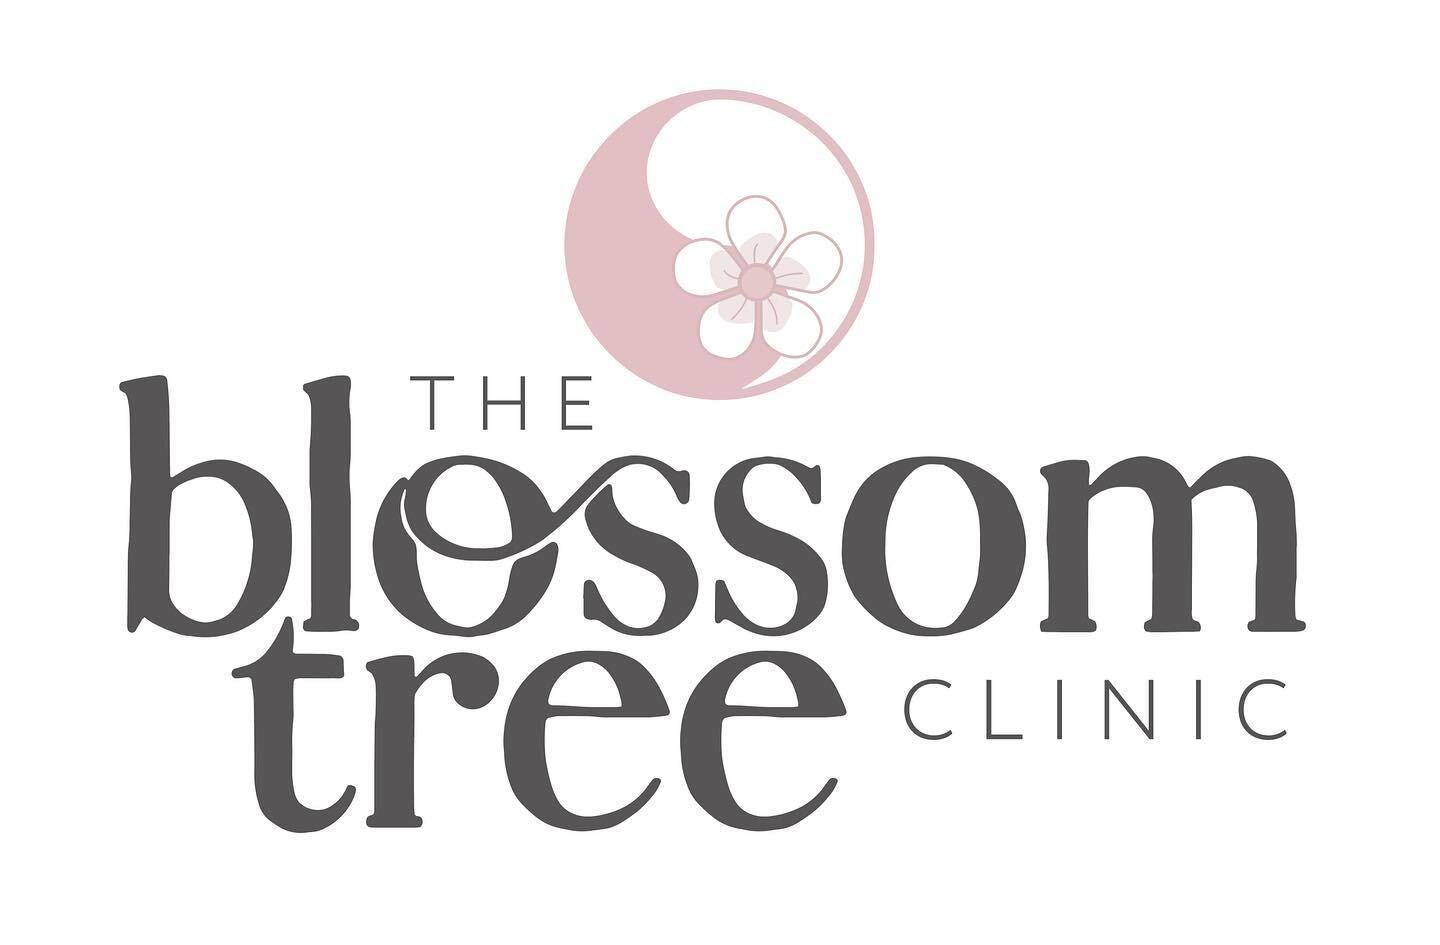 Welcome to The Blossom Tree Clinic!🌸☯️

We are an acupuncture and complementary therapies clinic opening 🔜 

📍Love Lane, Pinner 

Bookings are available from 21st November (link in bio)👩&zwj;💻

Join us at our launch party on 30th November 3-6pm!